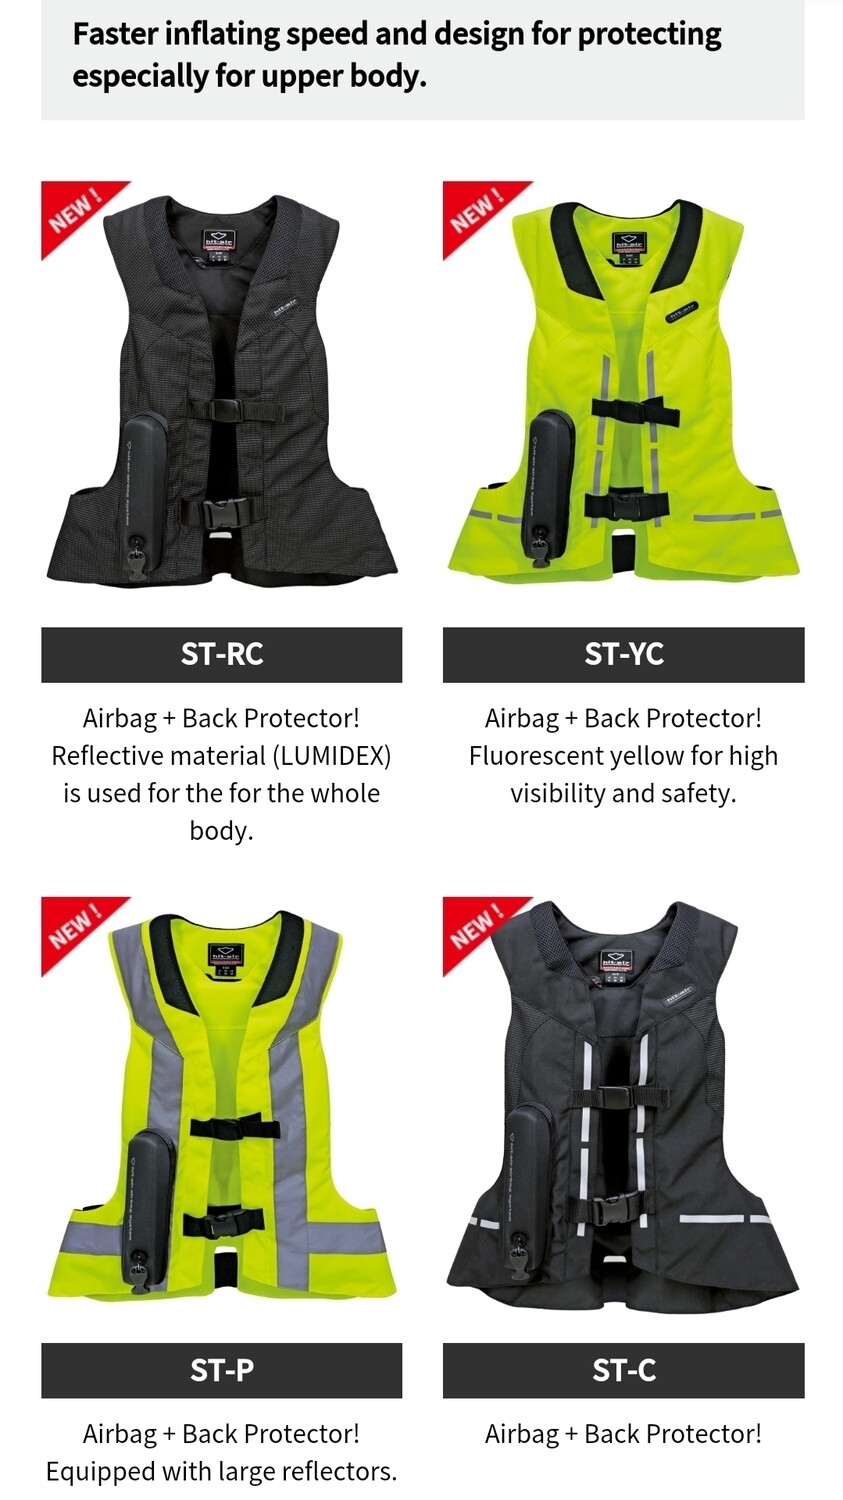 ST - light weight harness vest. Twin rear bottom airbags with Back Protector.
4 styles: C (standard), R (Reflective), Y (Yellow hi-viz), P (Yellow with reflectors).